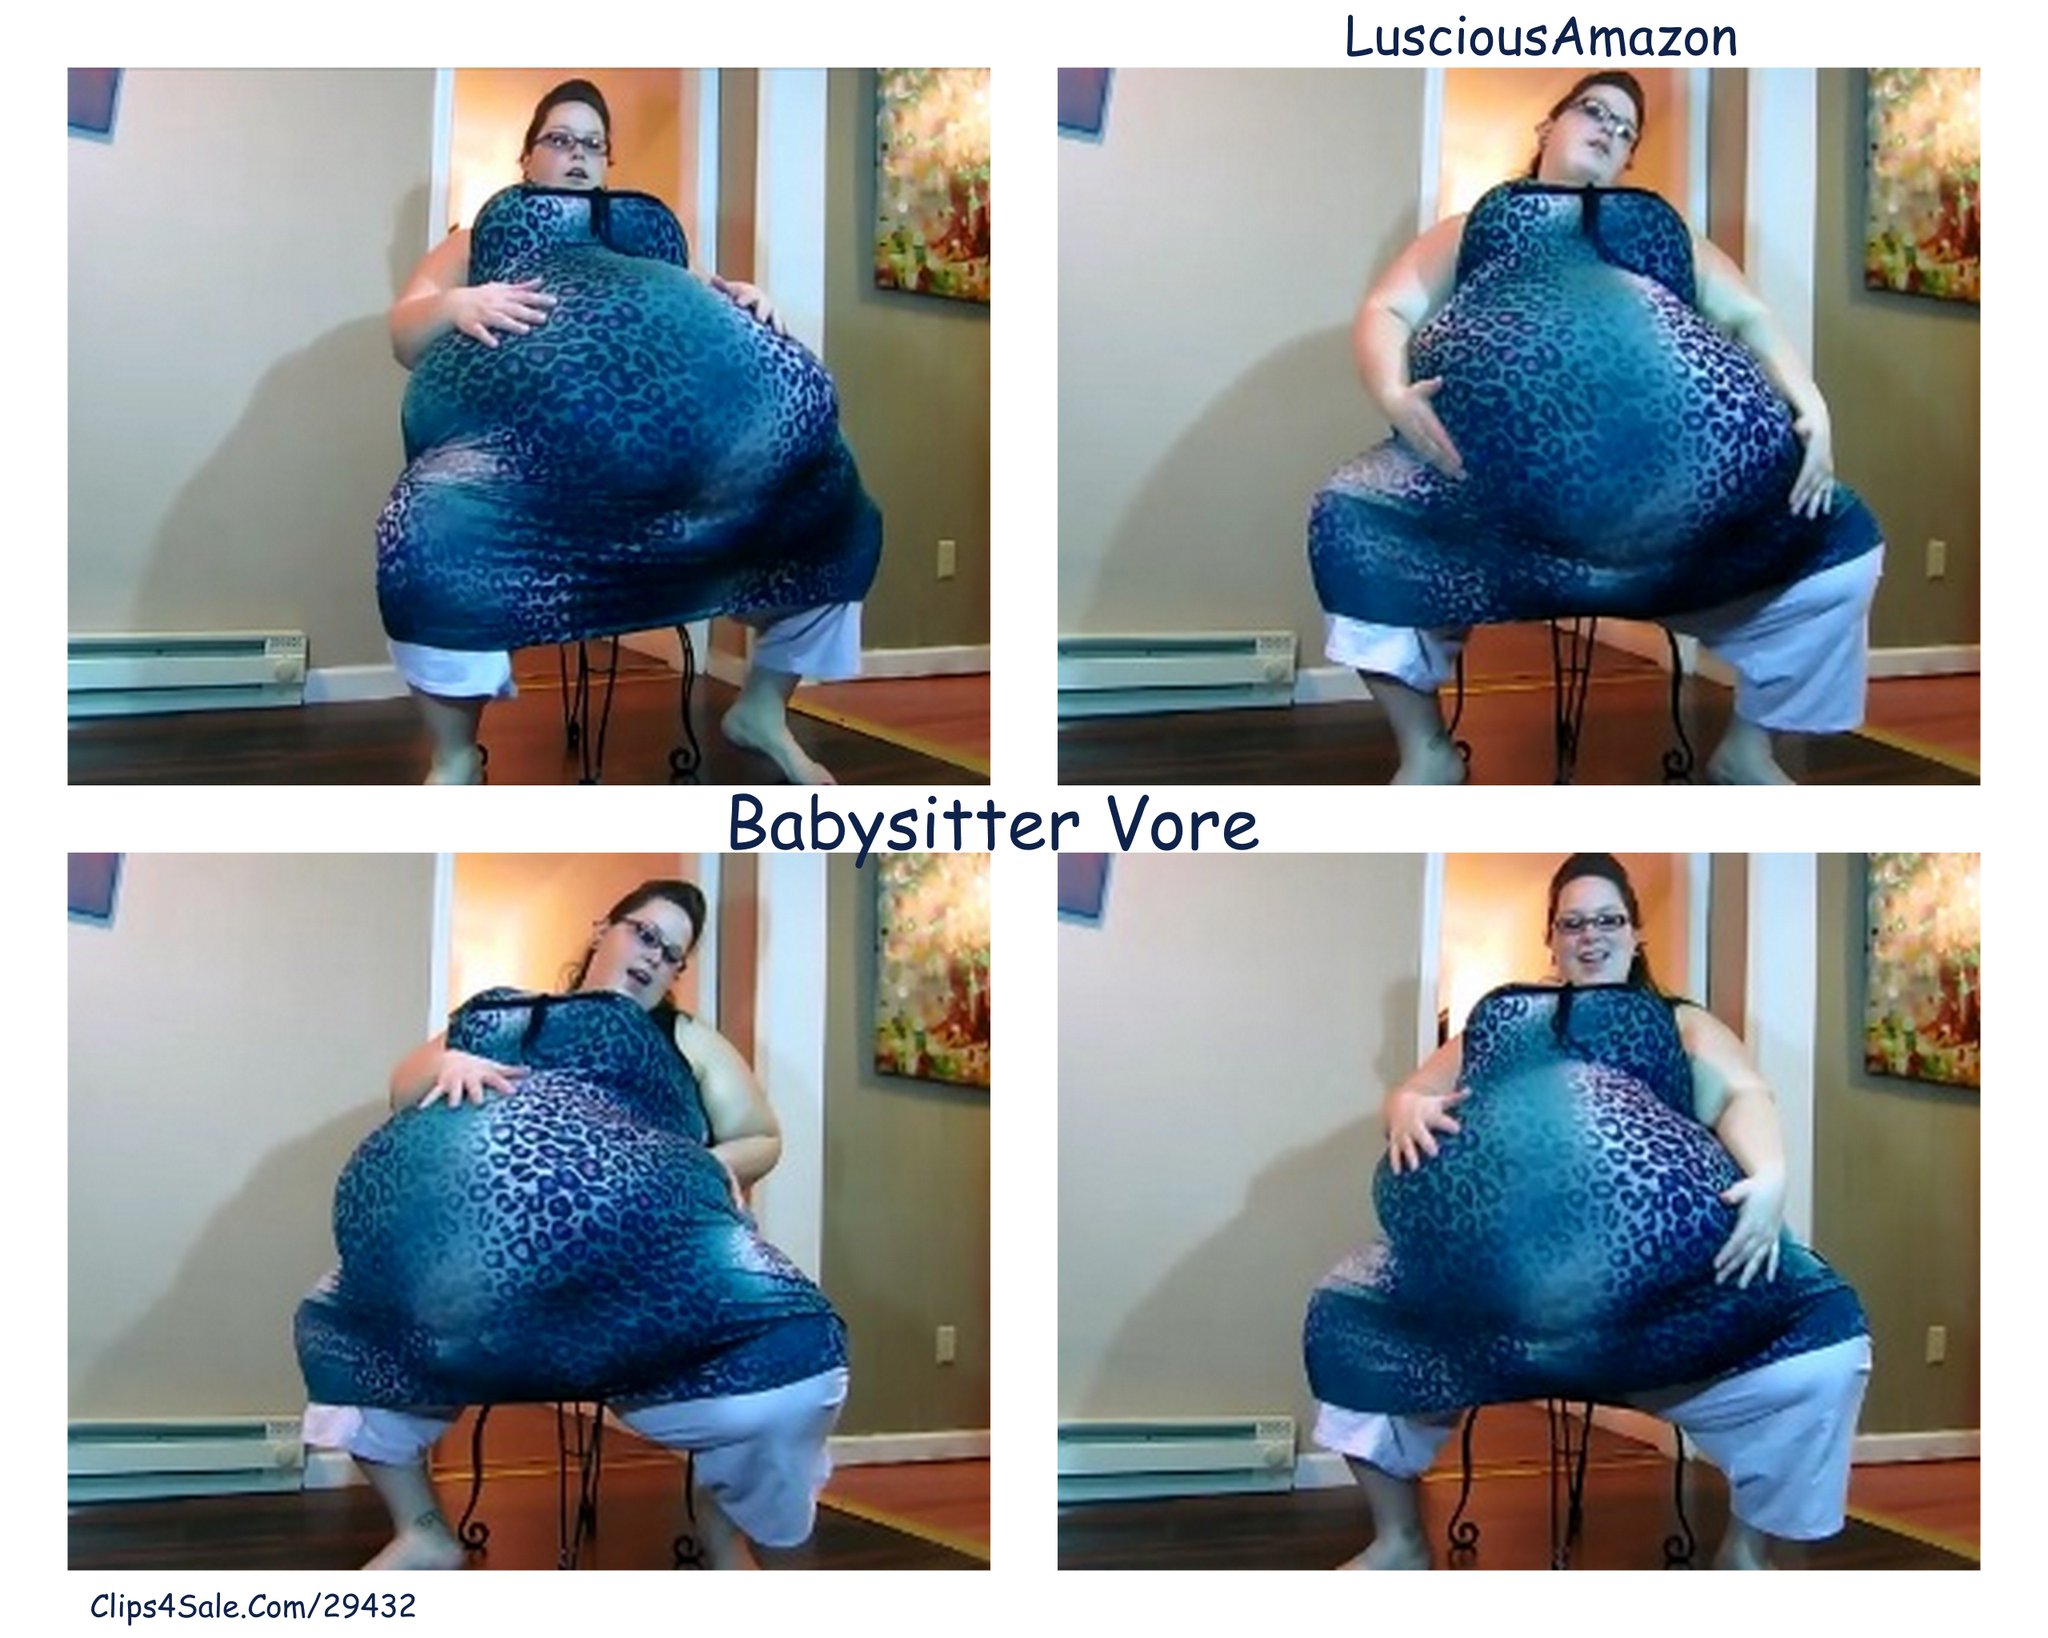 Luscious Fox on X: Oh my! Have you seen my new Babysitting Vore Video?!  It's awesome. Check it out - t.cojaZ7XVyESk <3  t.coHX41TiPgtV  X